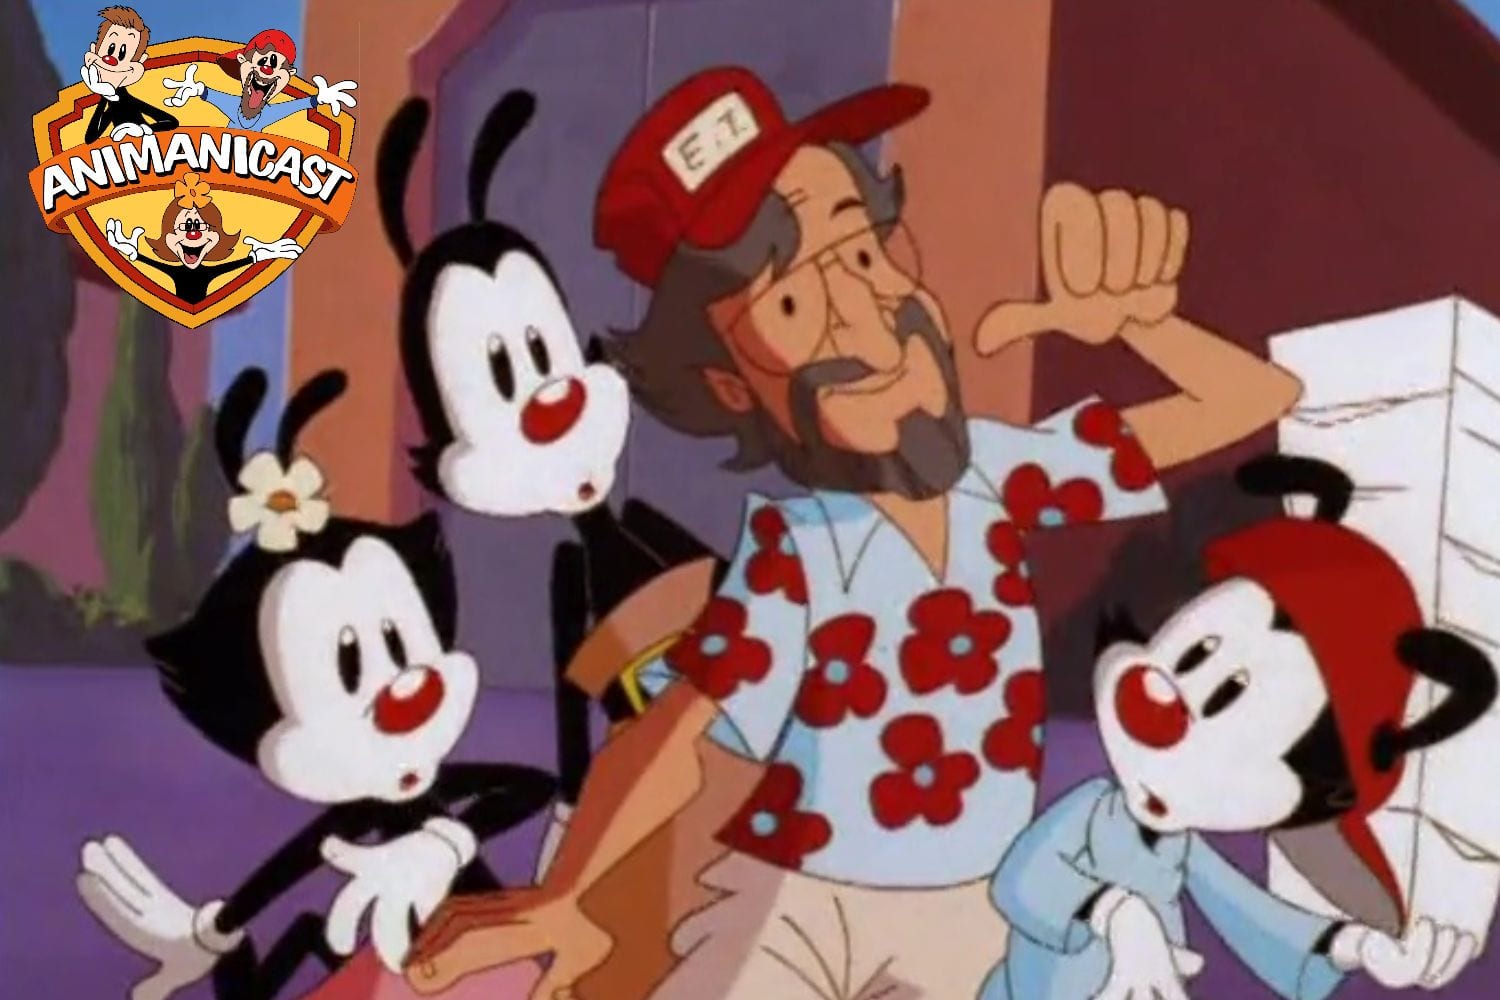 Animanicast: Discussing Animaniacs Episode 95 "Hooray for North Hollyw...